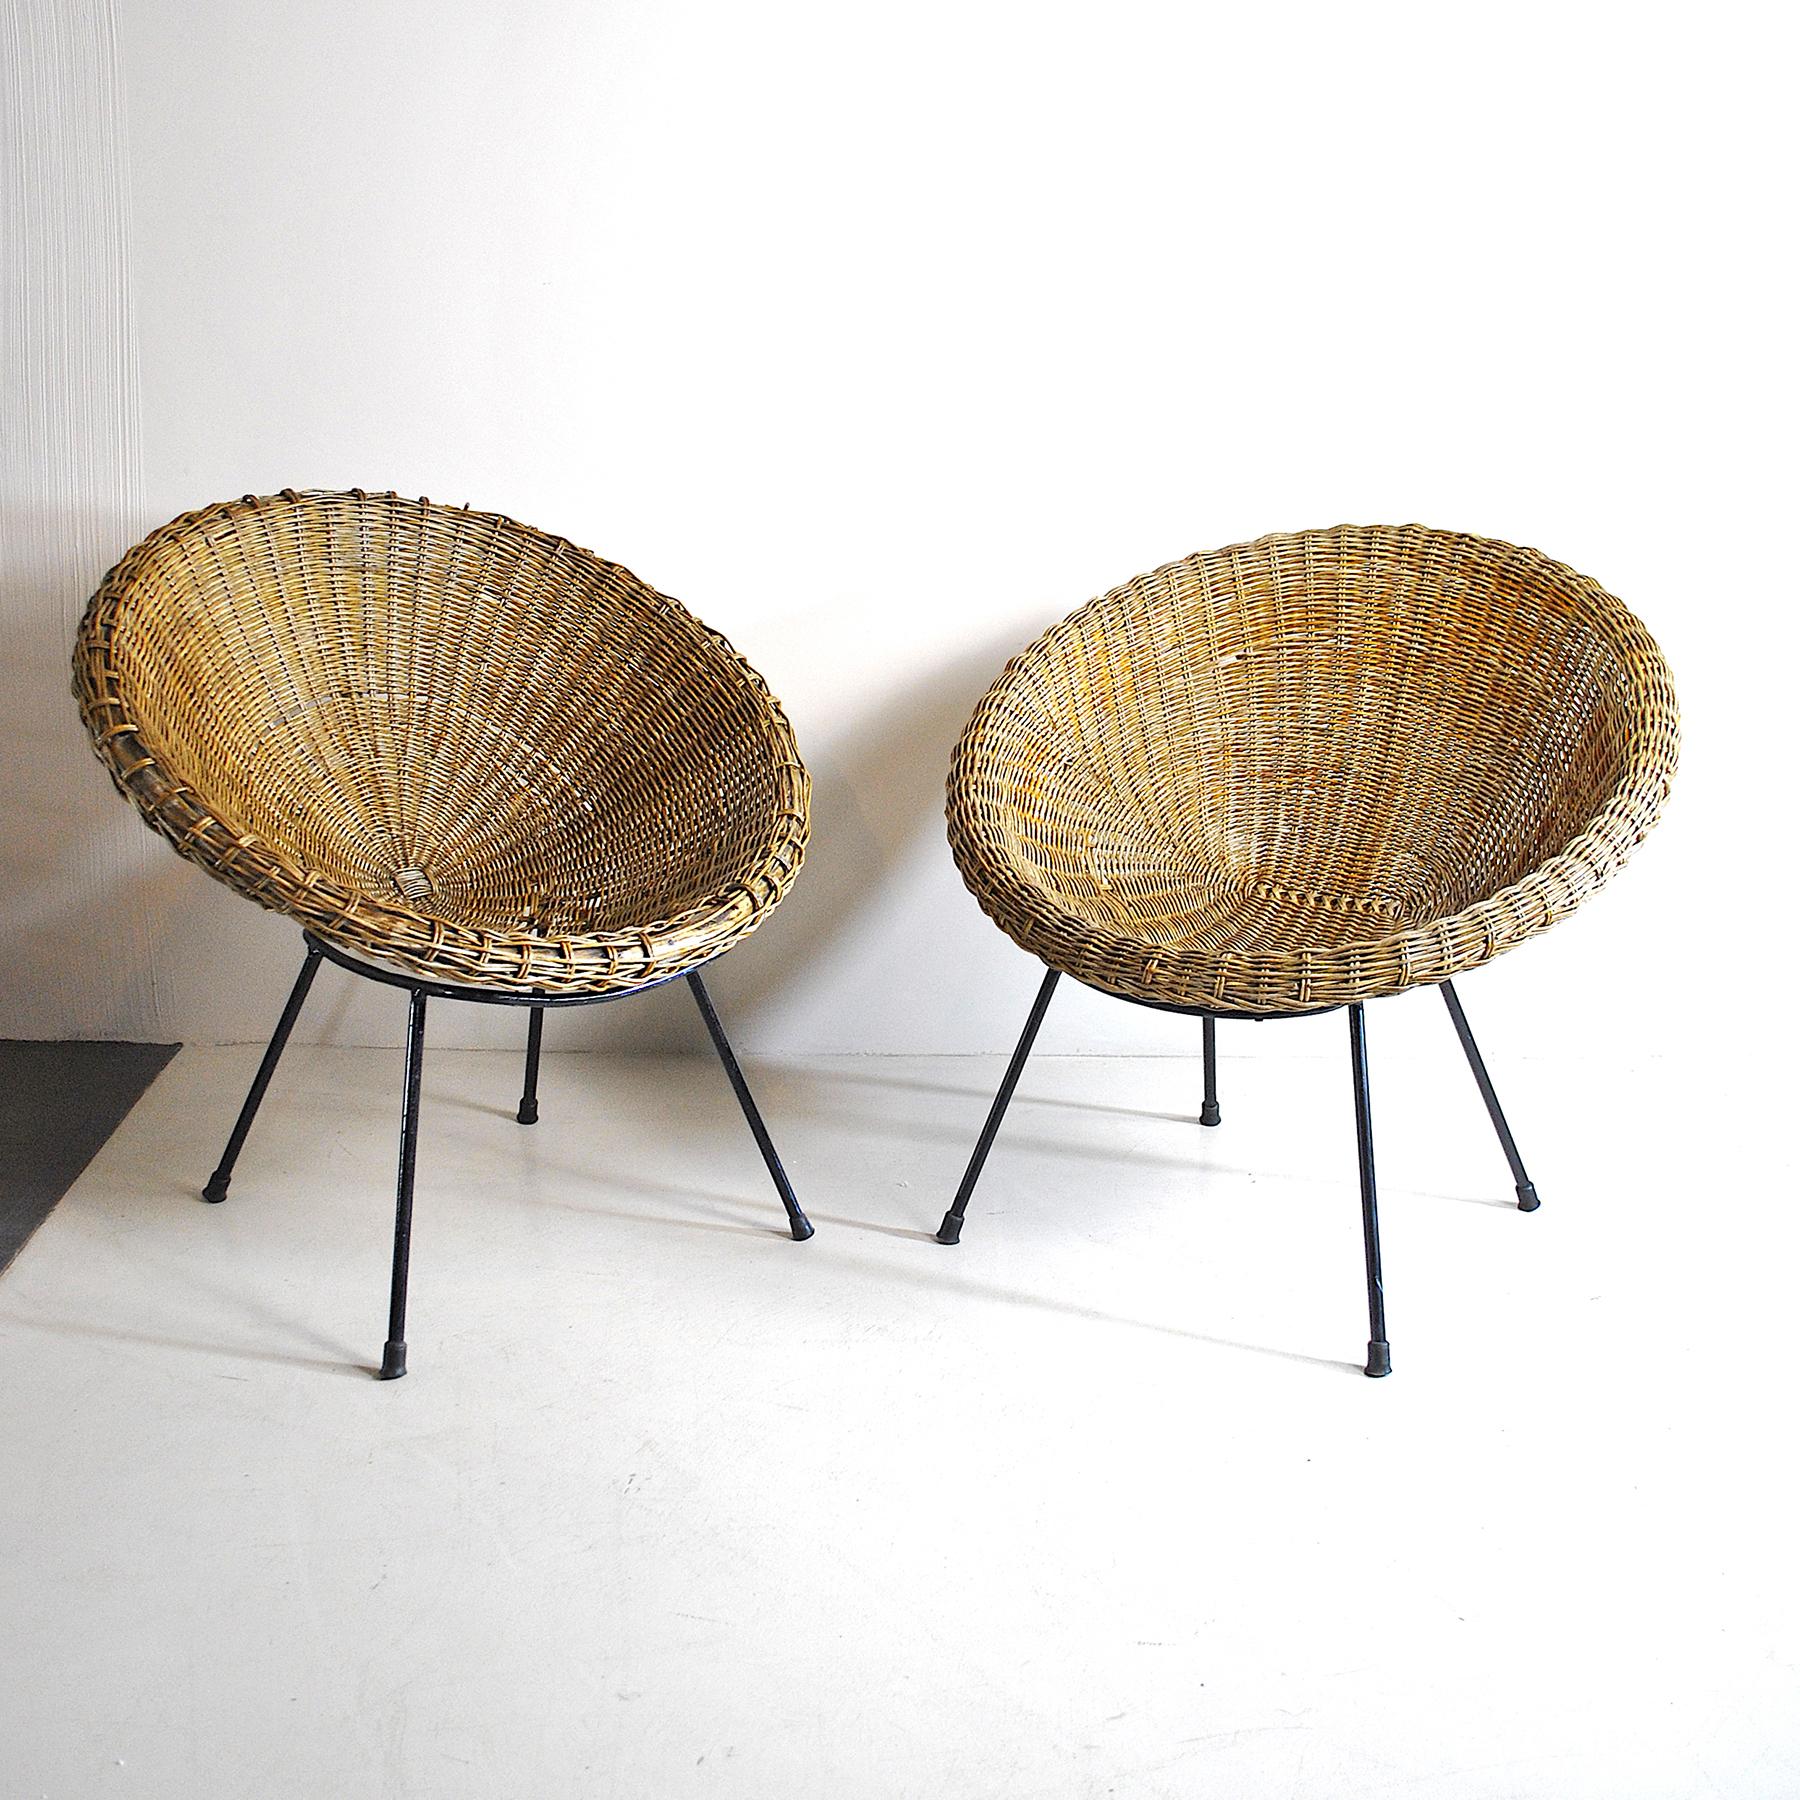 Pair of rattan eggs chairs with iron structure, Italian production from the 1960s (one piece needs to be significantly restored).